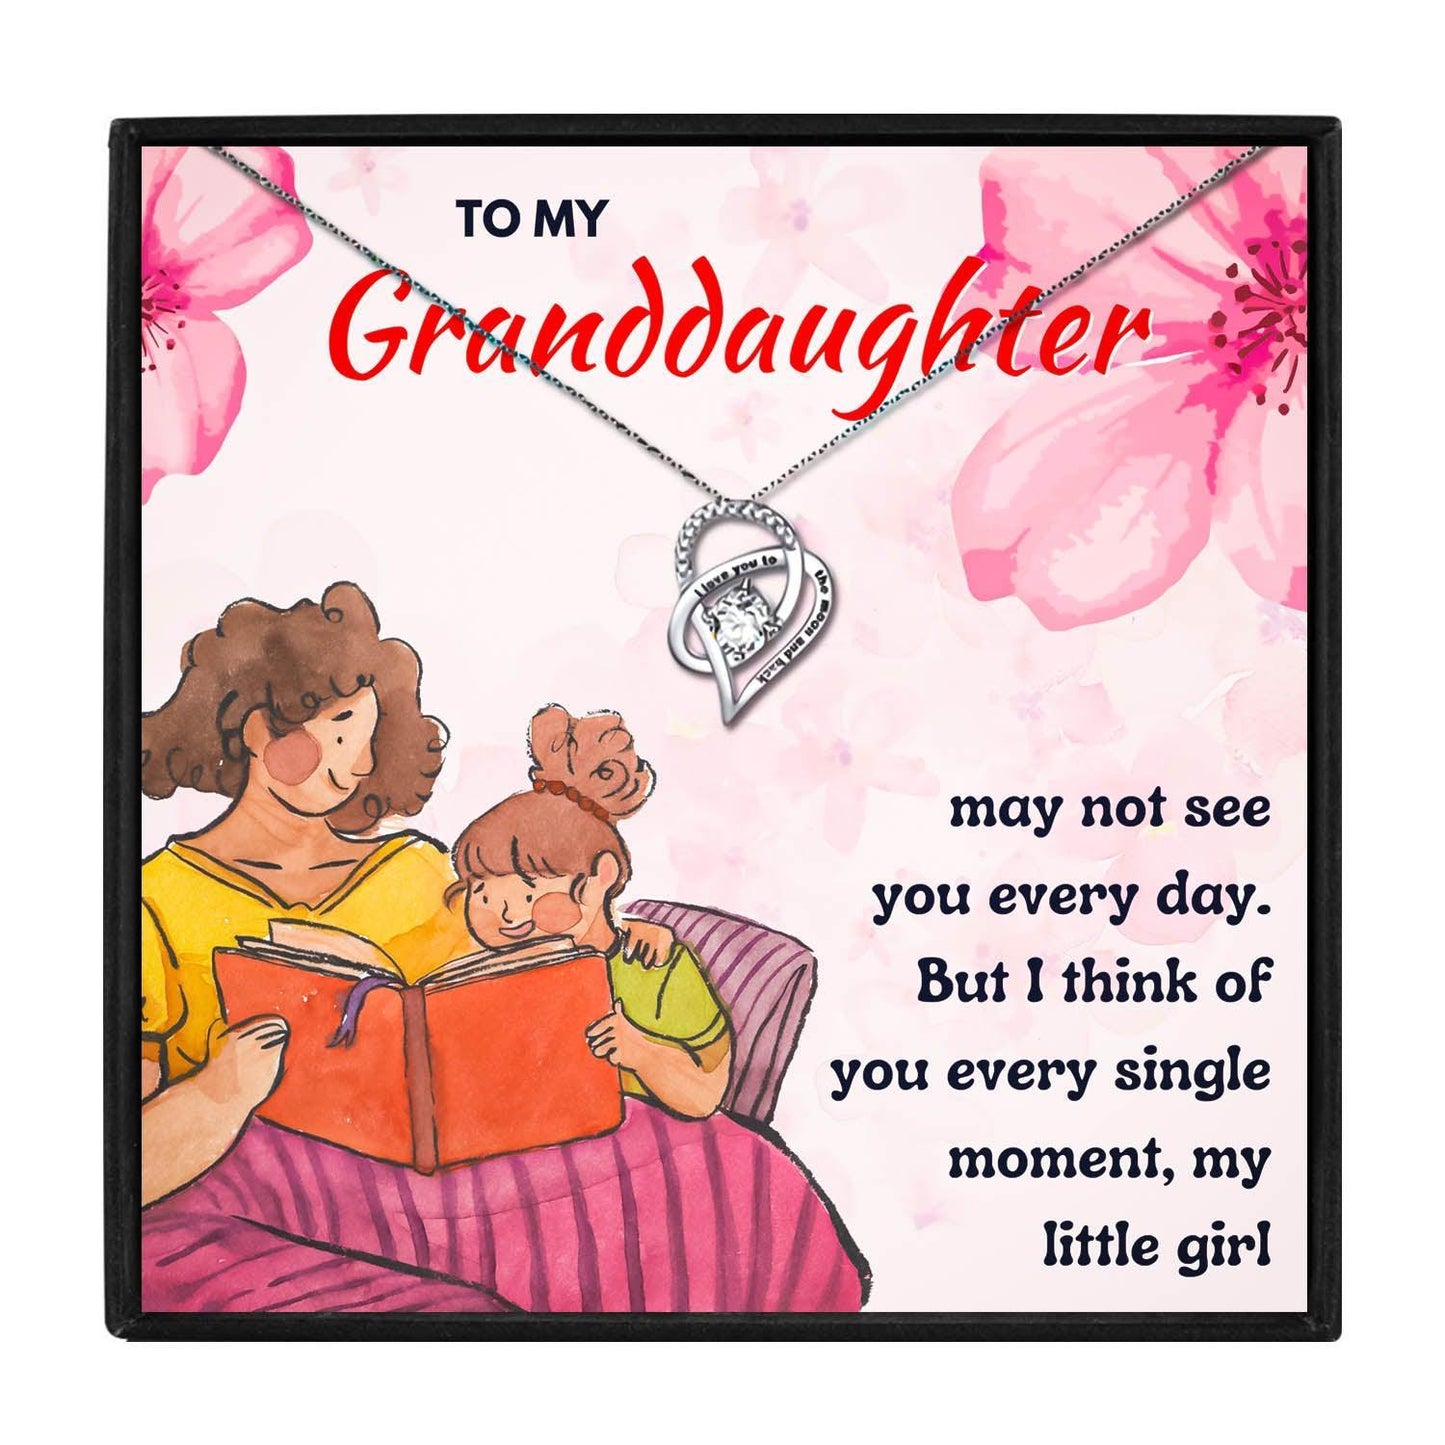 Special Gifts For Granddaughters From Grandma in 2023 | Special Gifts For Granddaughters From Grandma - undefined | gifts for teenage granddaughter, graduation gifts for granddaughter, granddaughter necklace from grandma, special gifts for granddaughters, unique granddaughter gifts | From Hunny Life | hunnylife.com